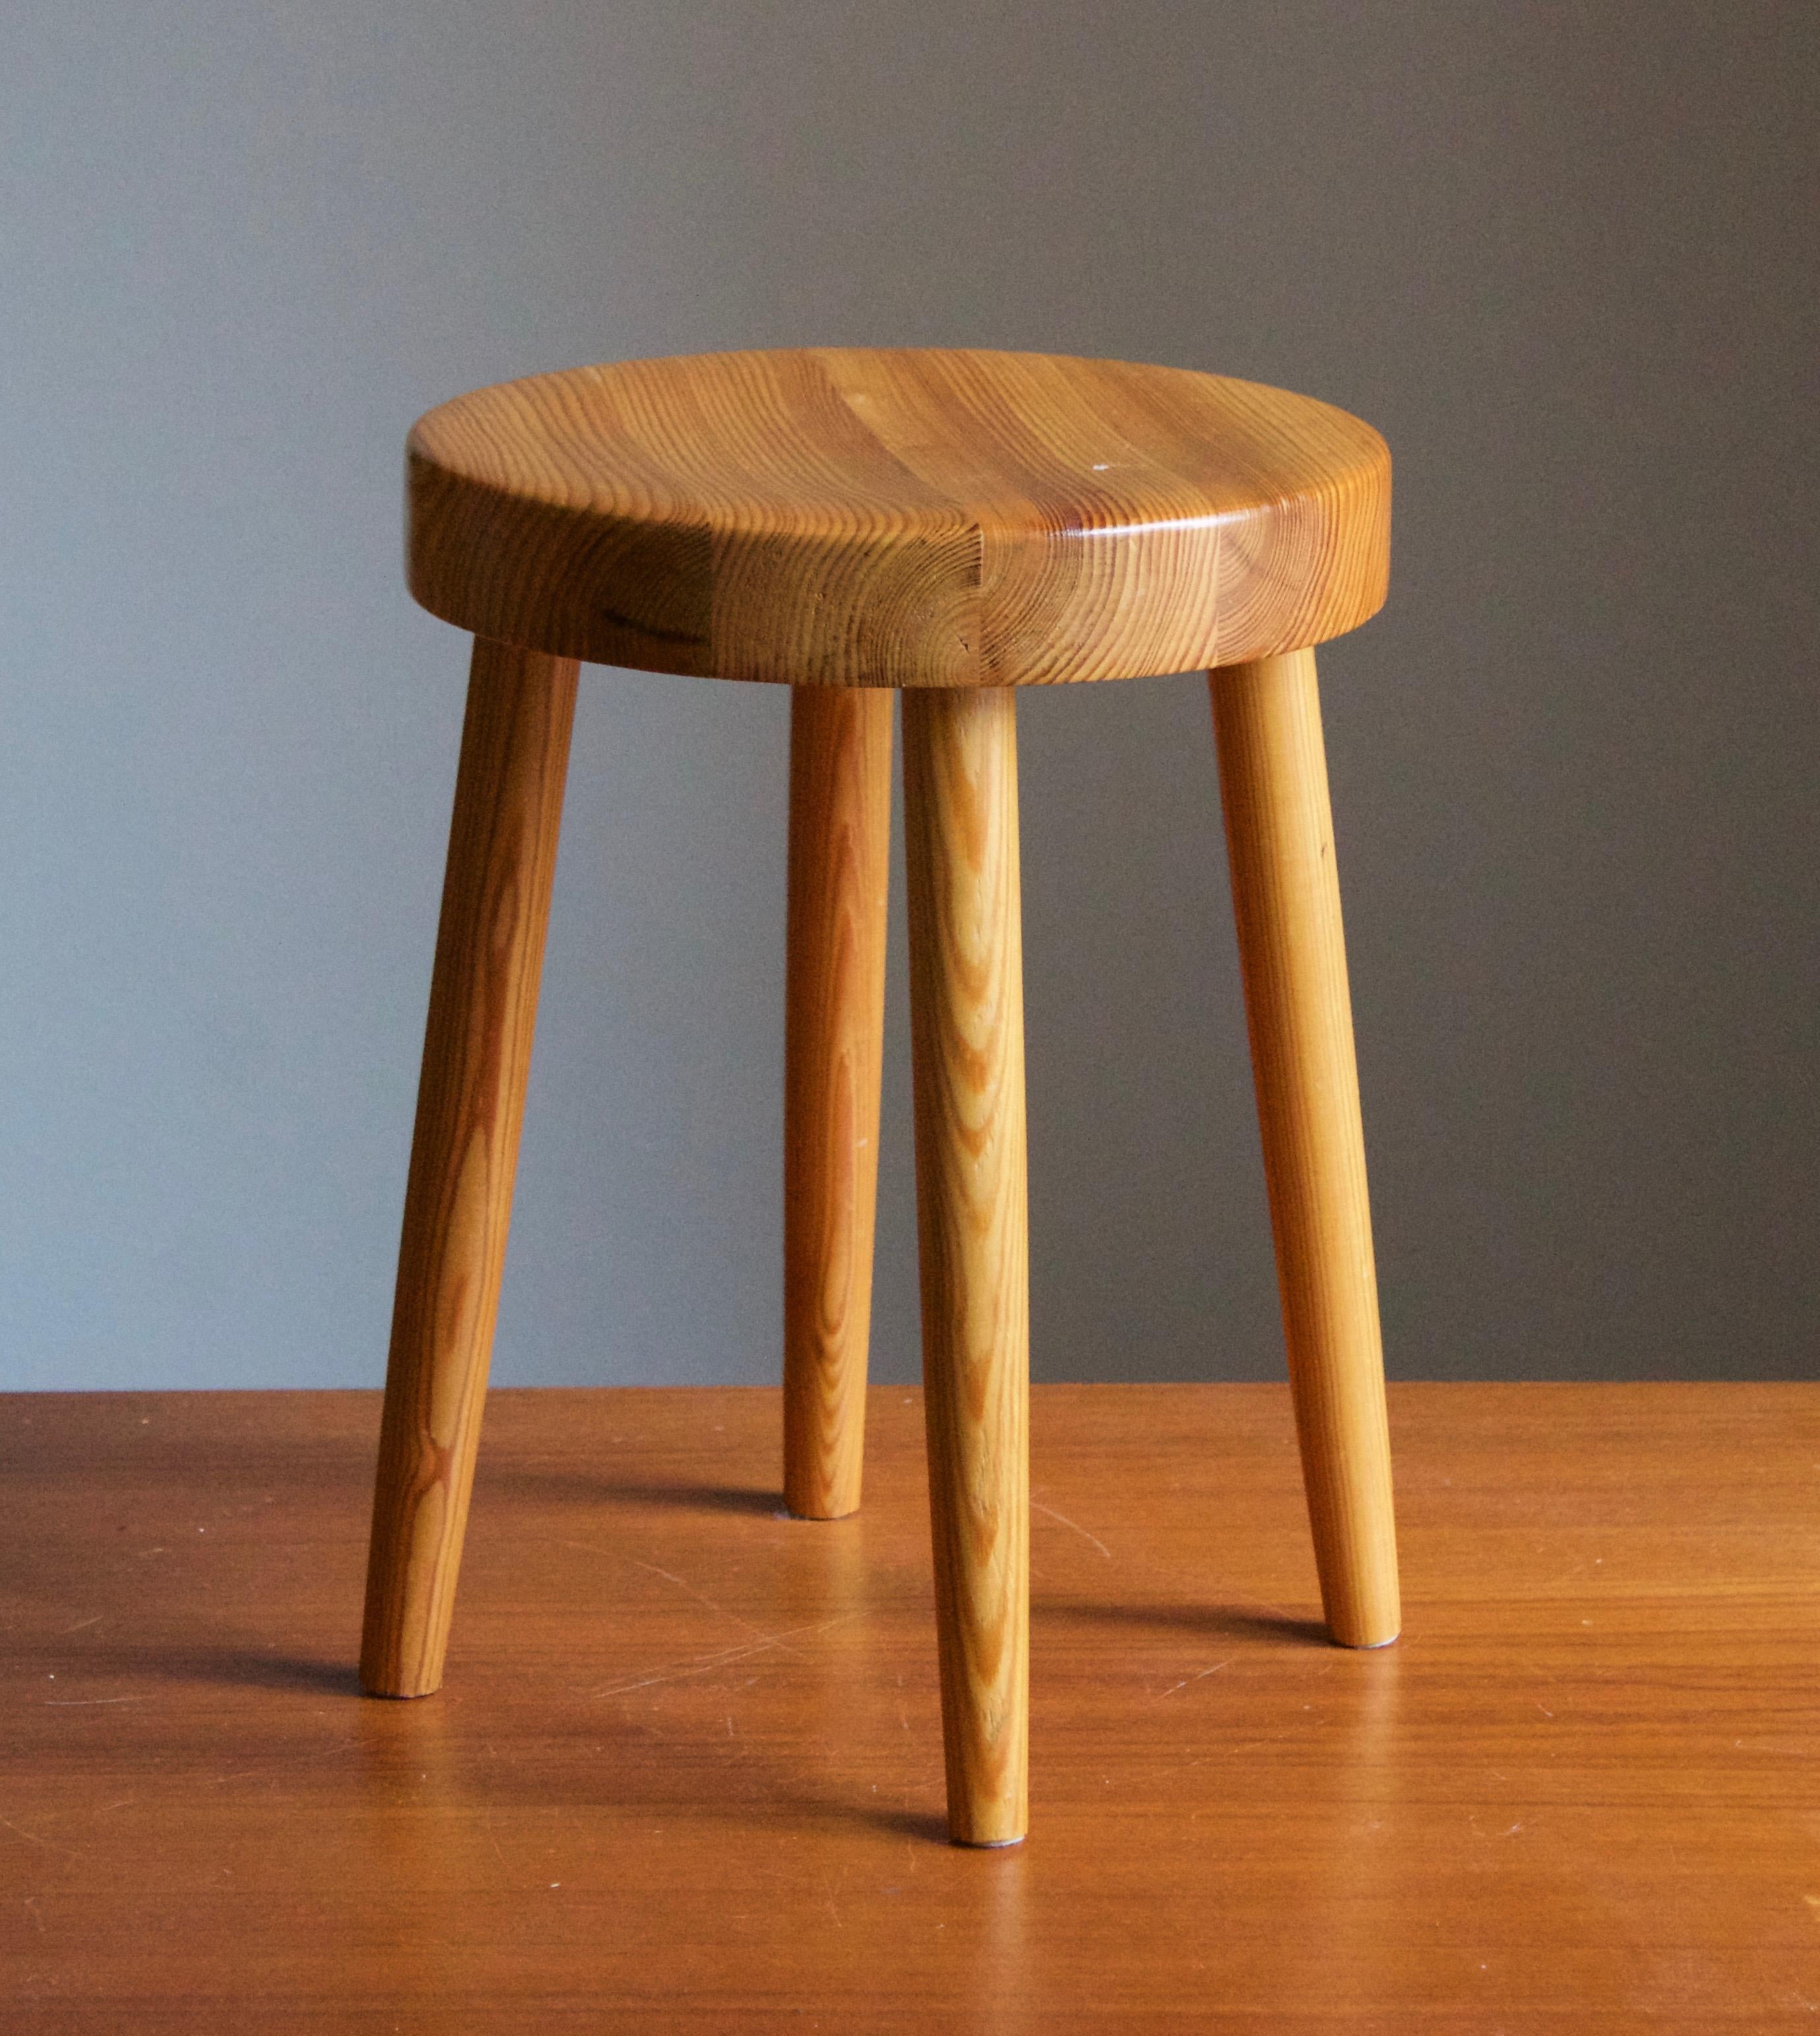 A Swedish pinewood stool. By unknown designer, 1970s.





